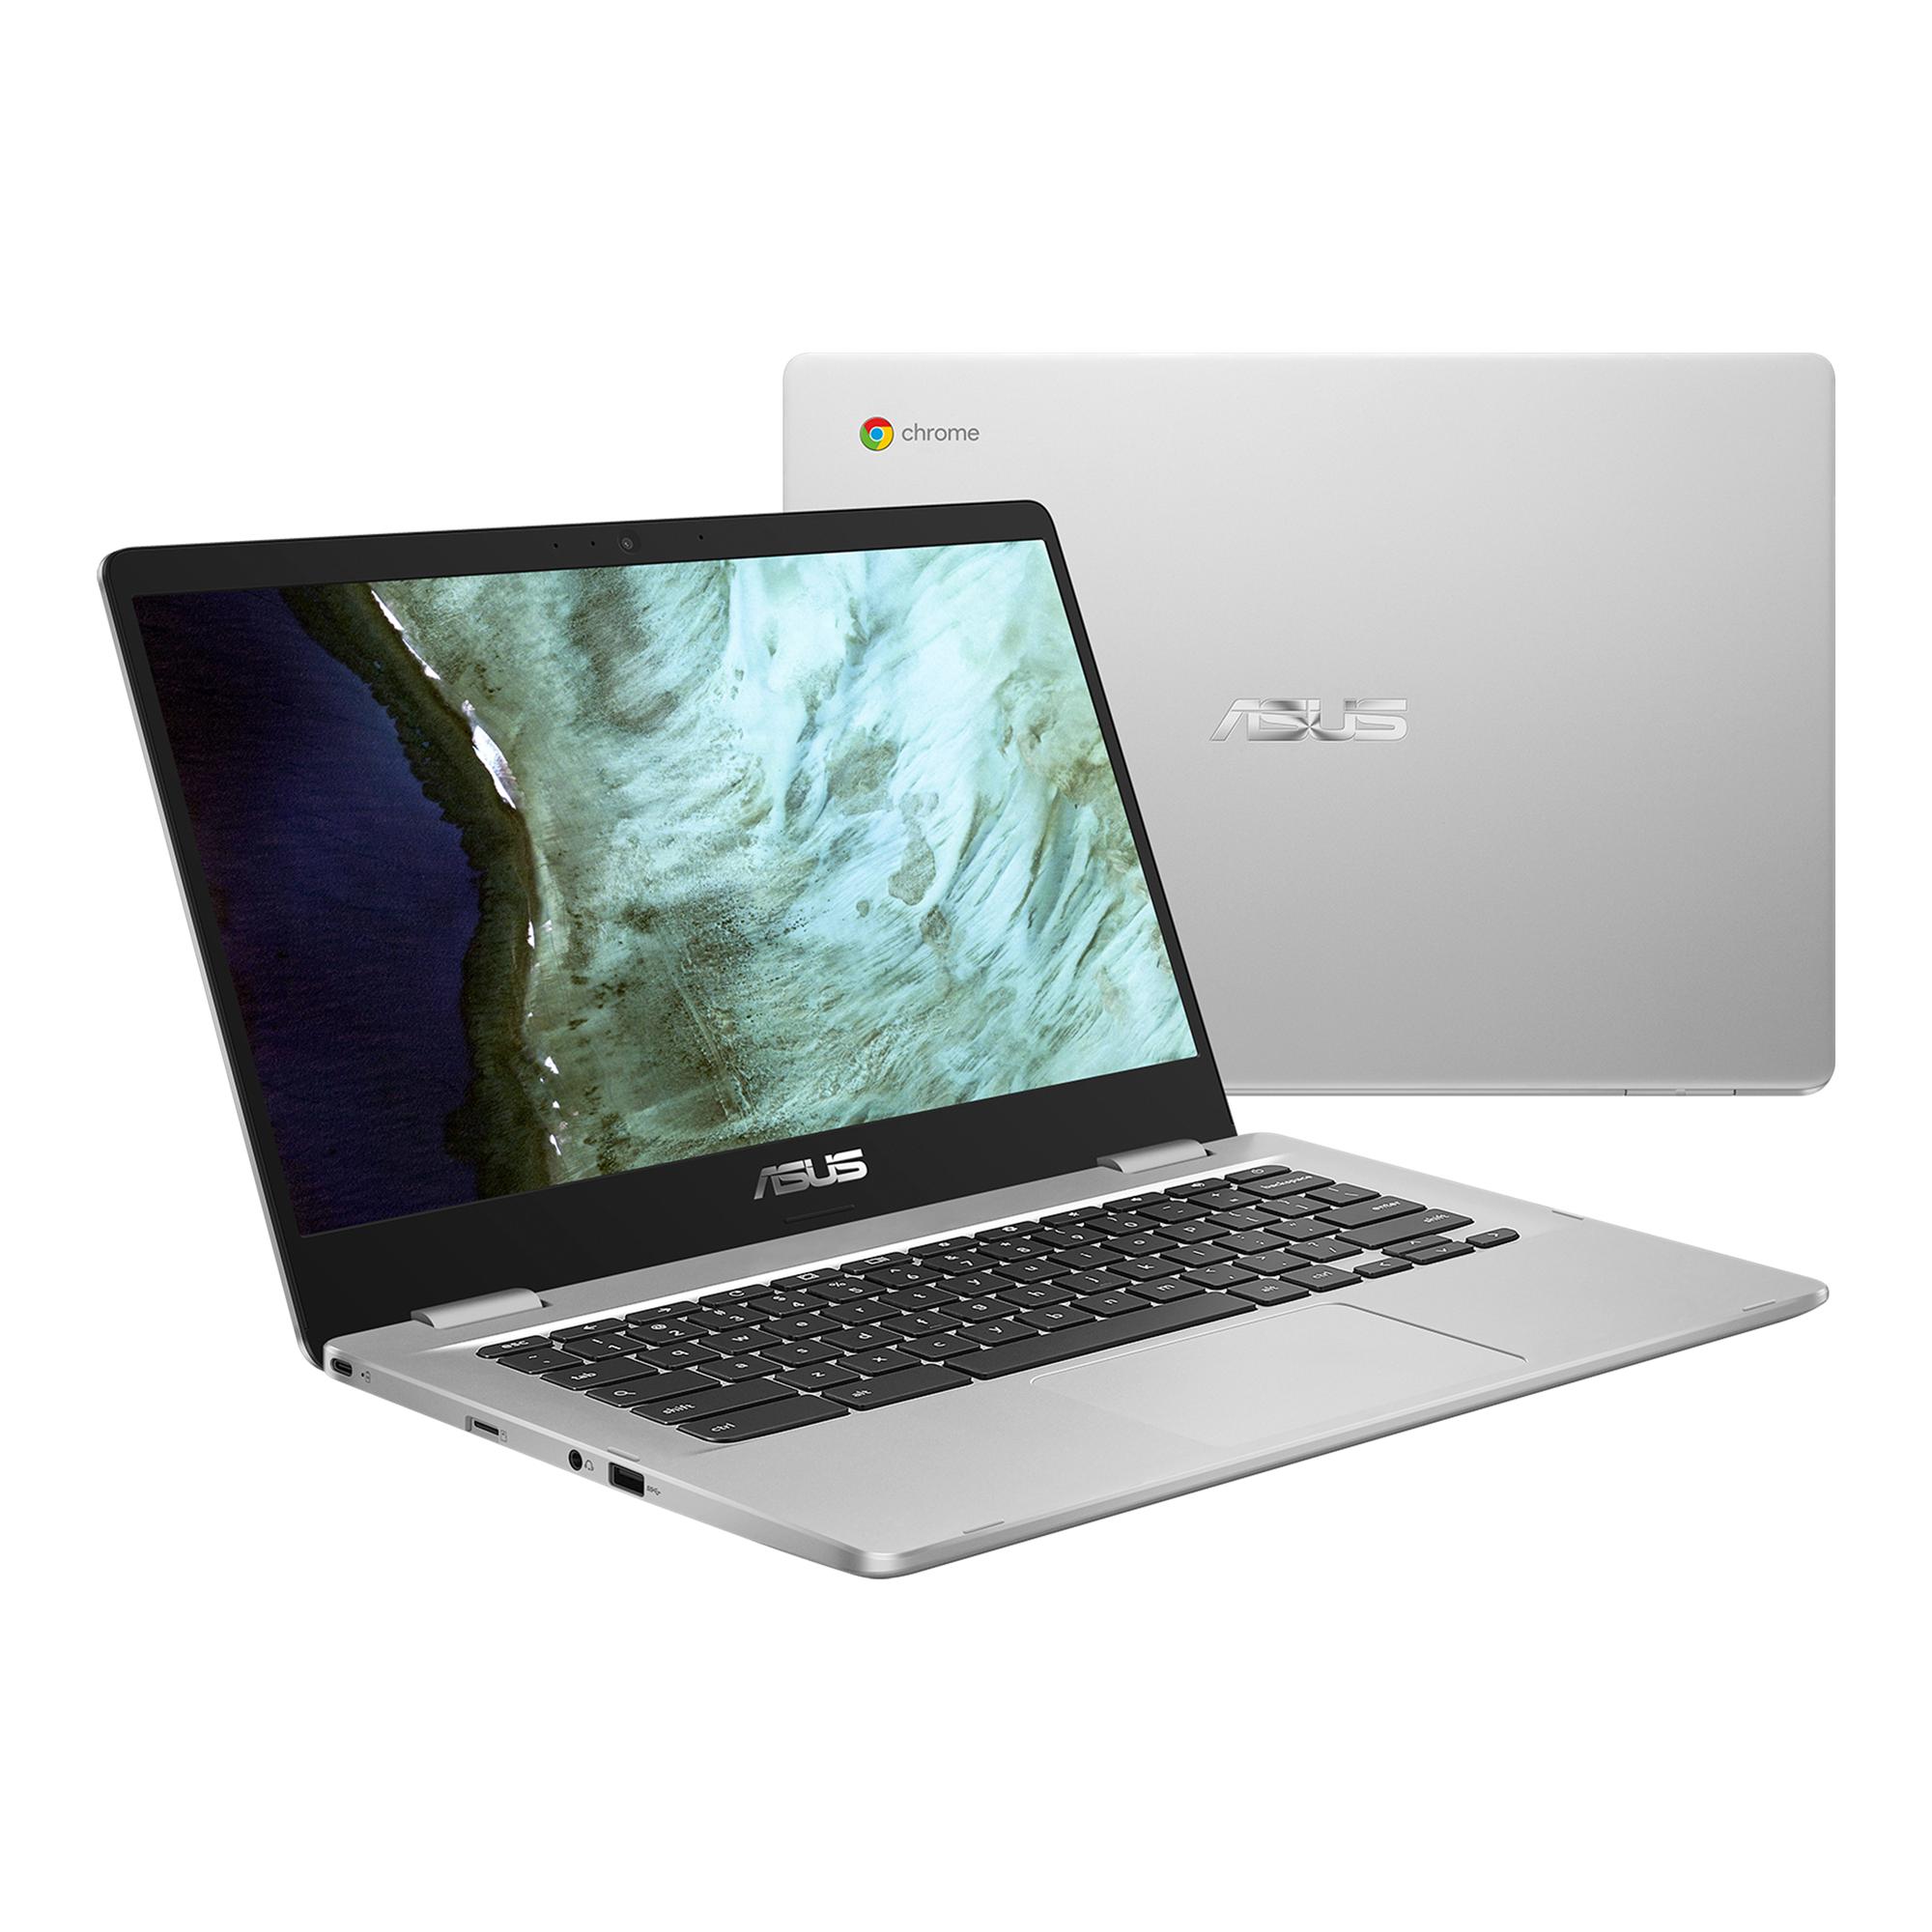 PC/タブレット ノートPC ASUS Chromebook C423｜Laptops For Work｜ASUS USA